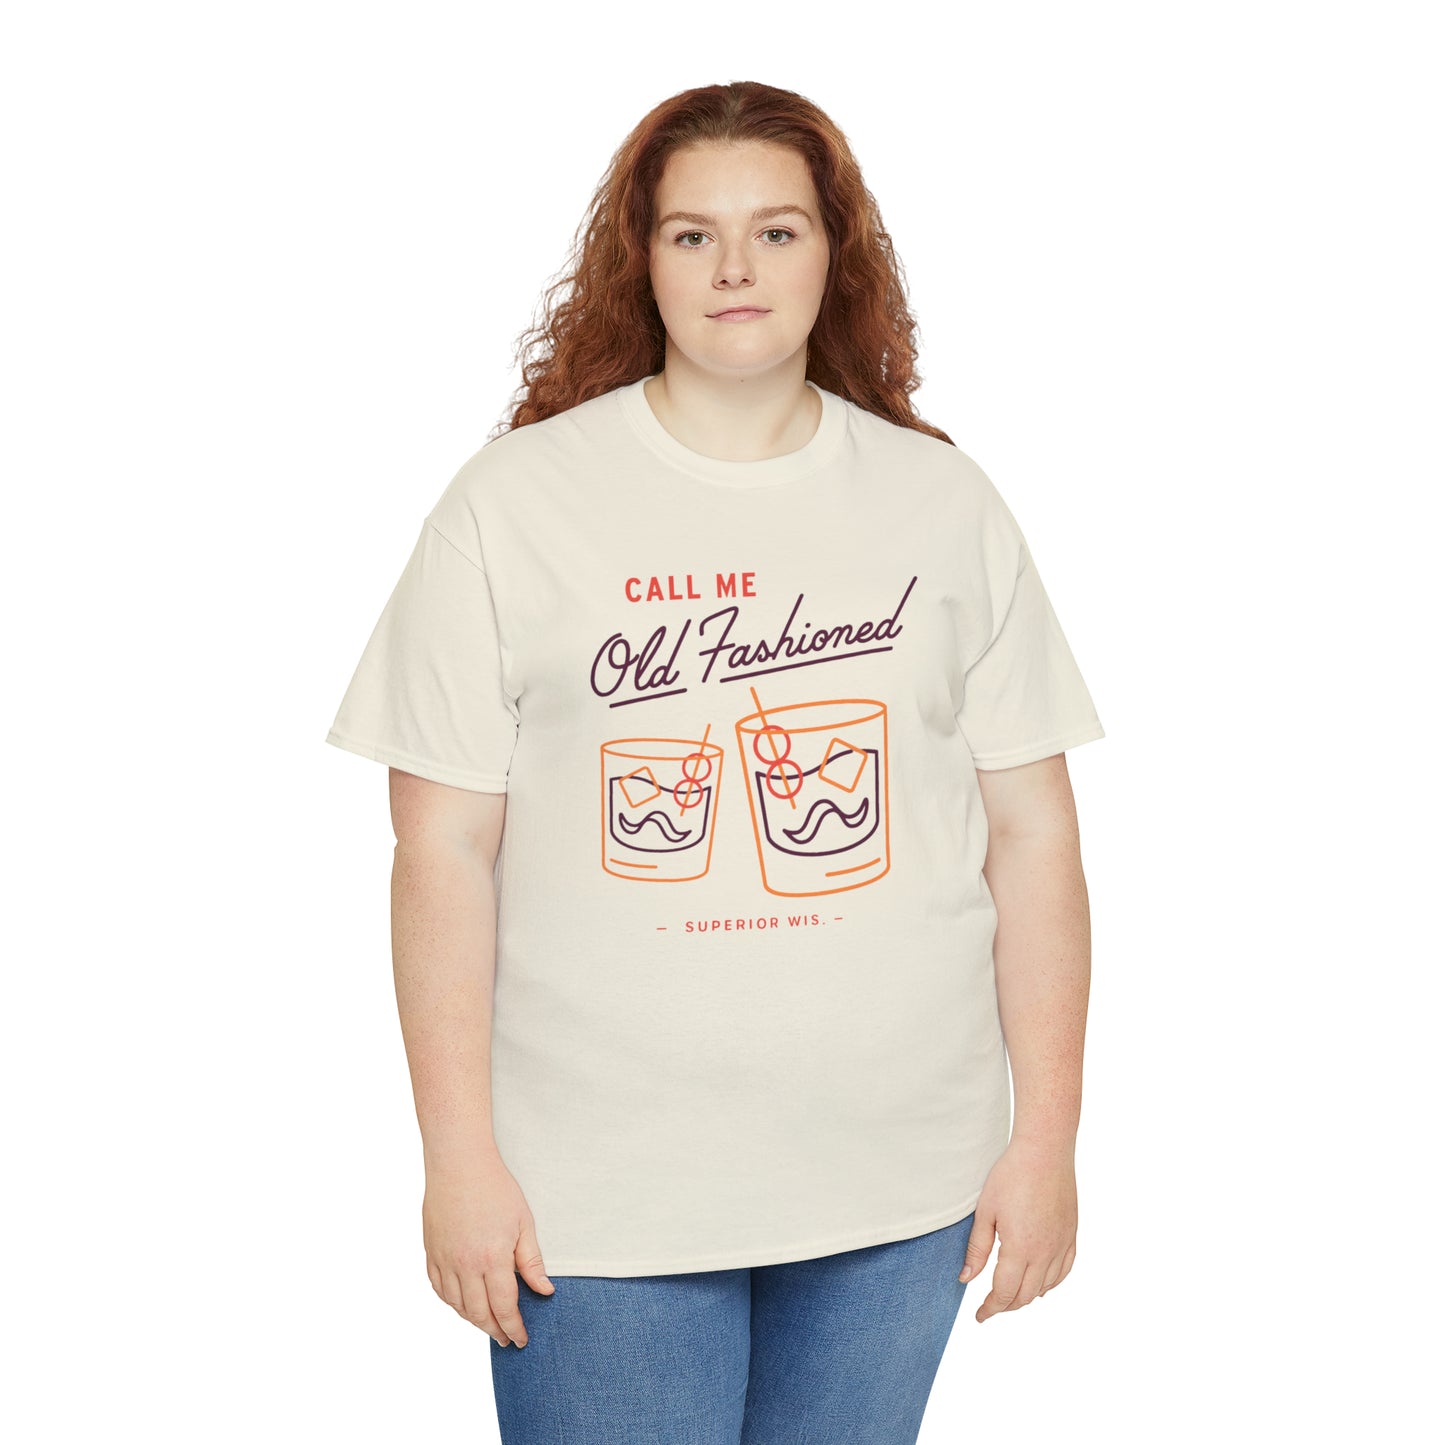 Old Fashioned (Light Colorway) Unisex Heavy Cotton Tee